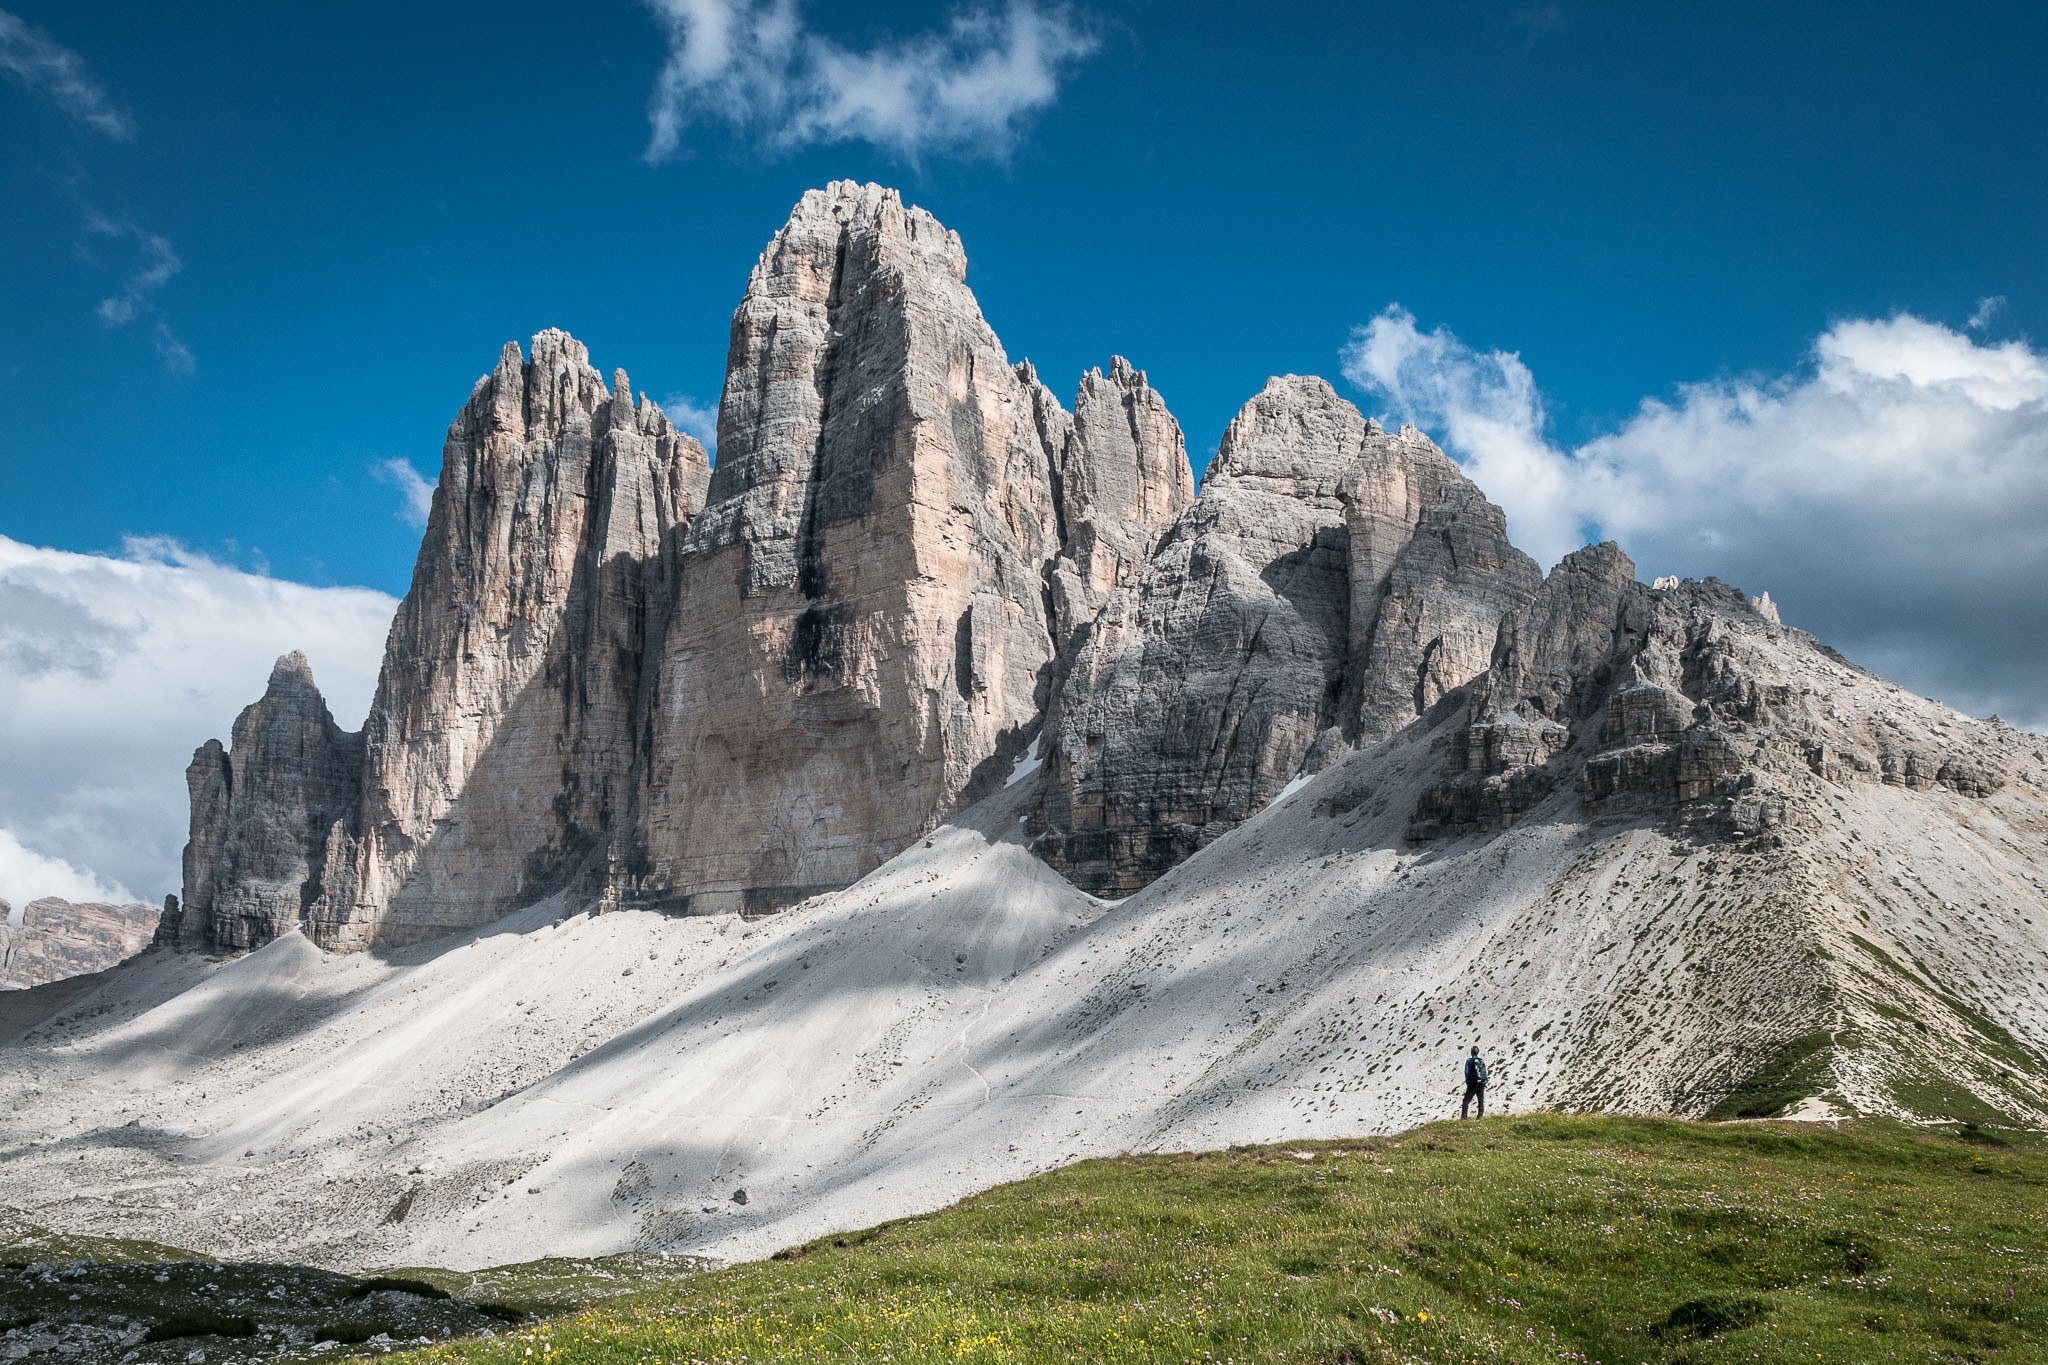 Dolomite Mountains hike, bike, ski holidays with Expert Local Guides